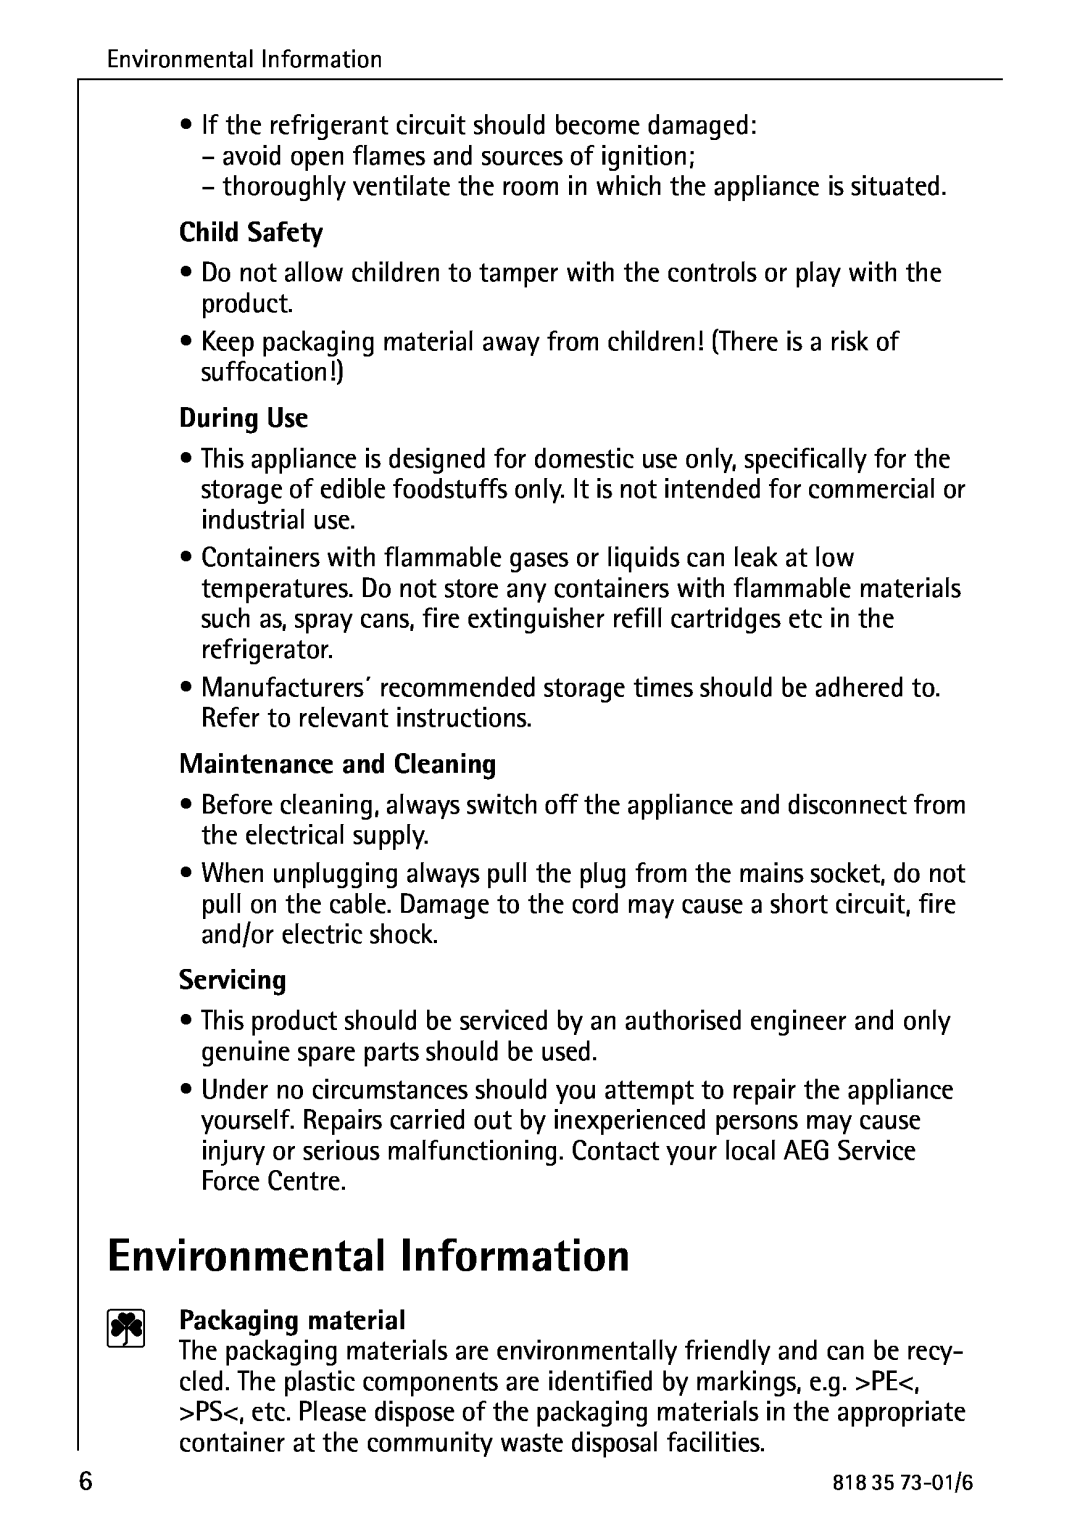 Electrolux SANTO 72340 KA Environmental Information, Child Safety, During Use, Maintenance and Cleaning, Servicing 